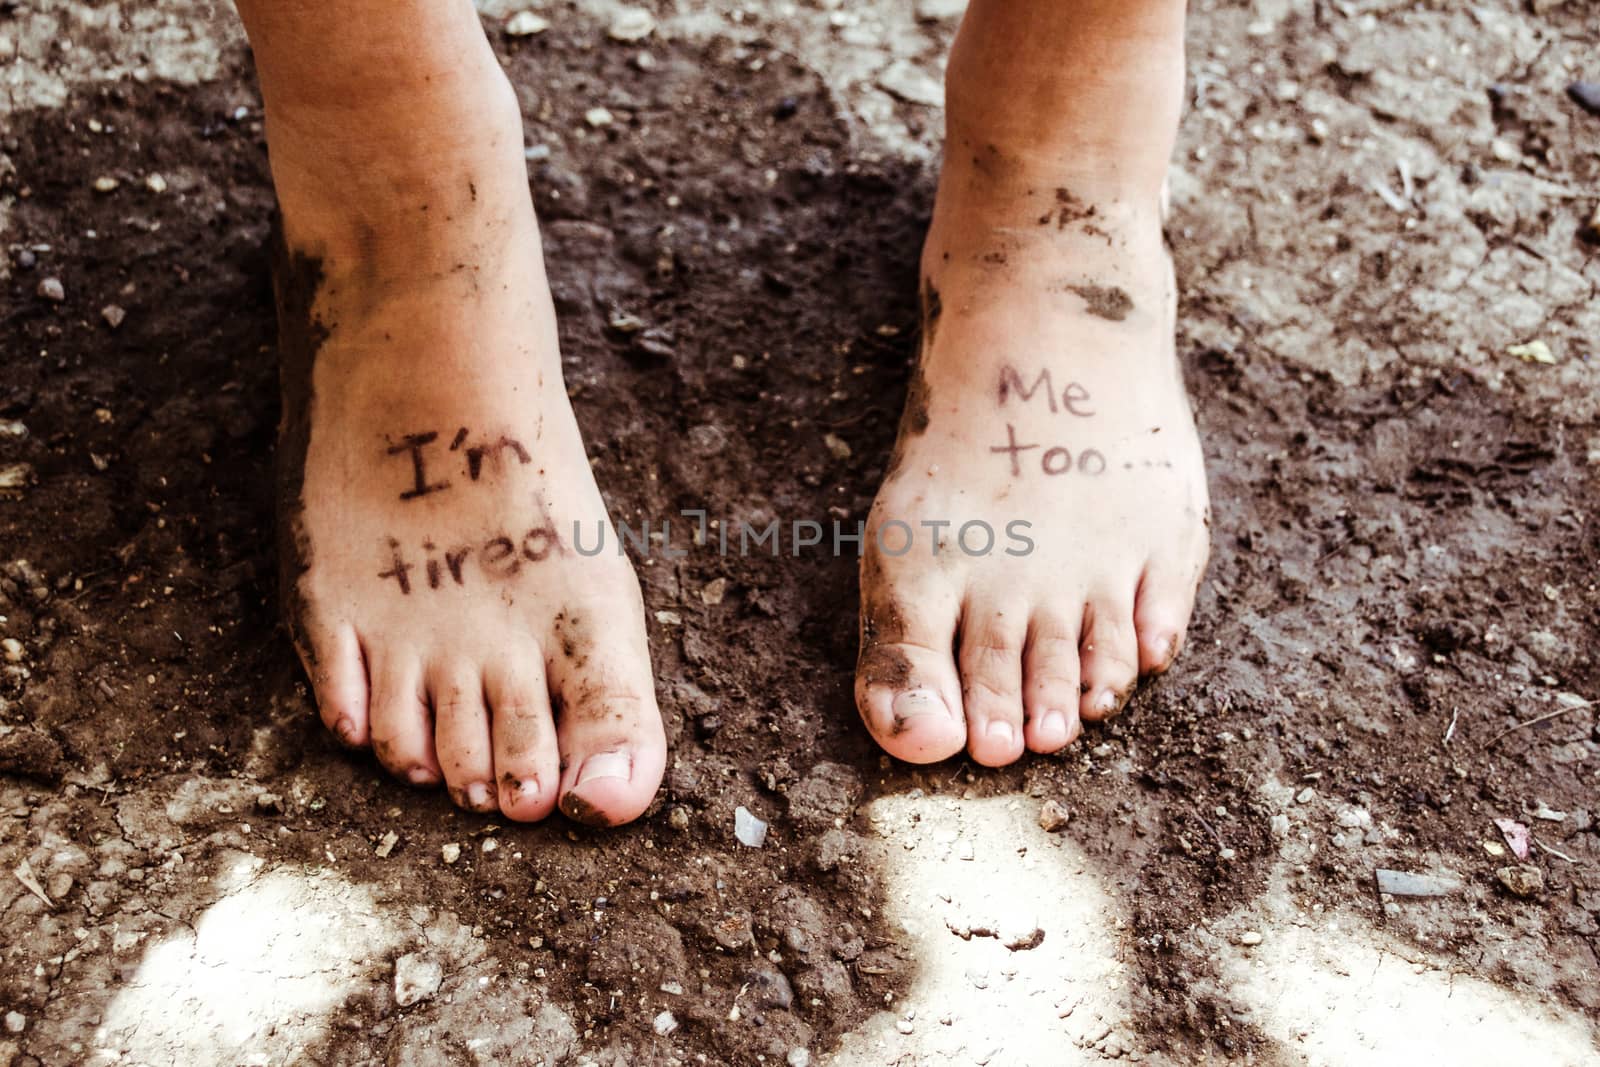 Photograph of a pair of human feet and the phrase: Im tired, me too